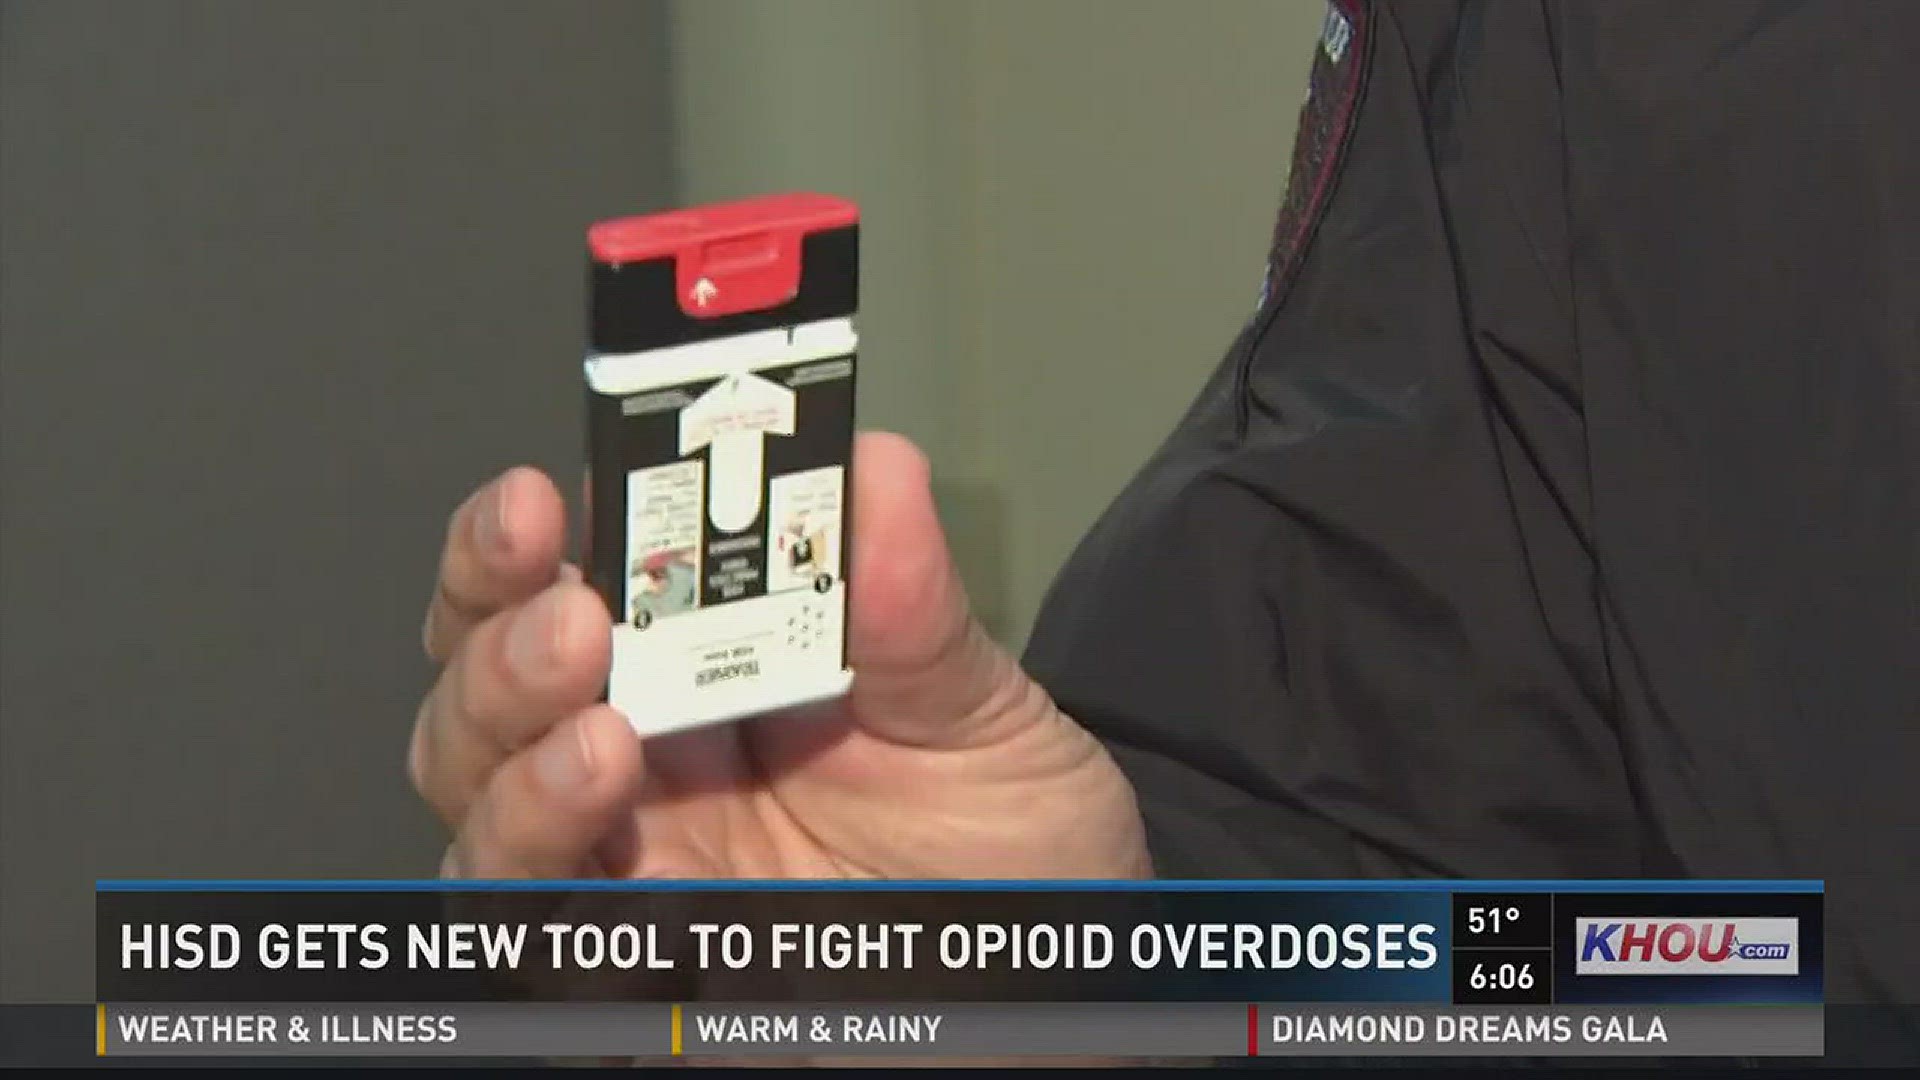 With the opioid epidemic on the rise, Houston ISD police are now arming themselves with a spray that can help combat an overdose on school campuses.